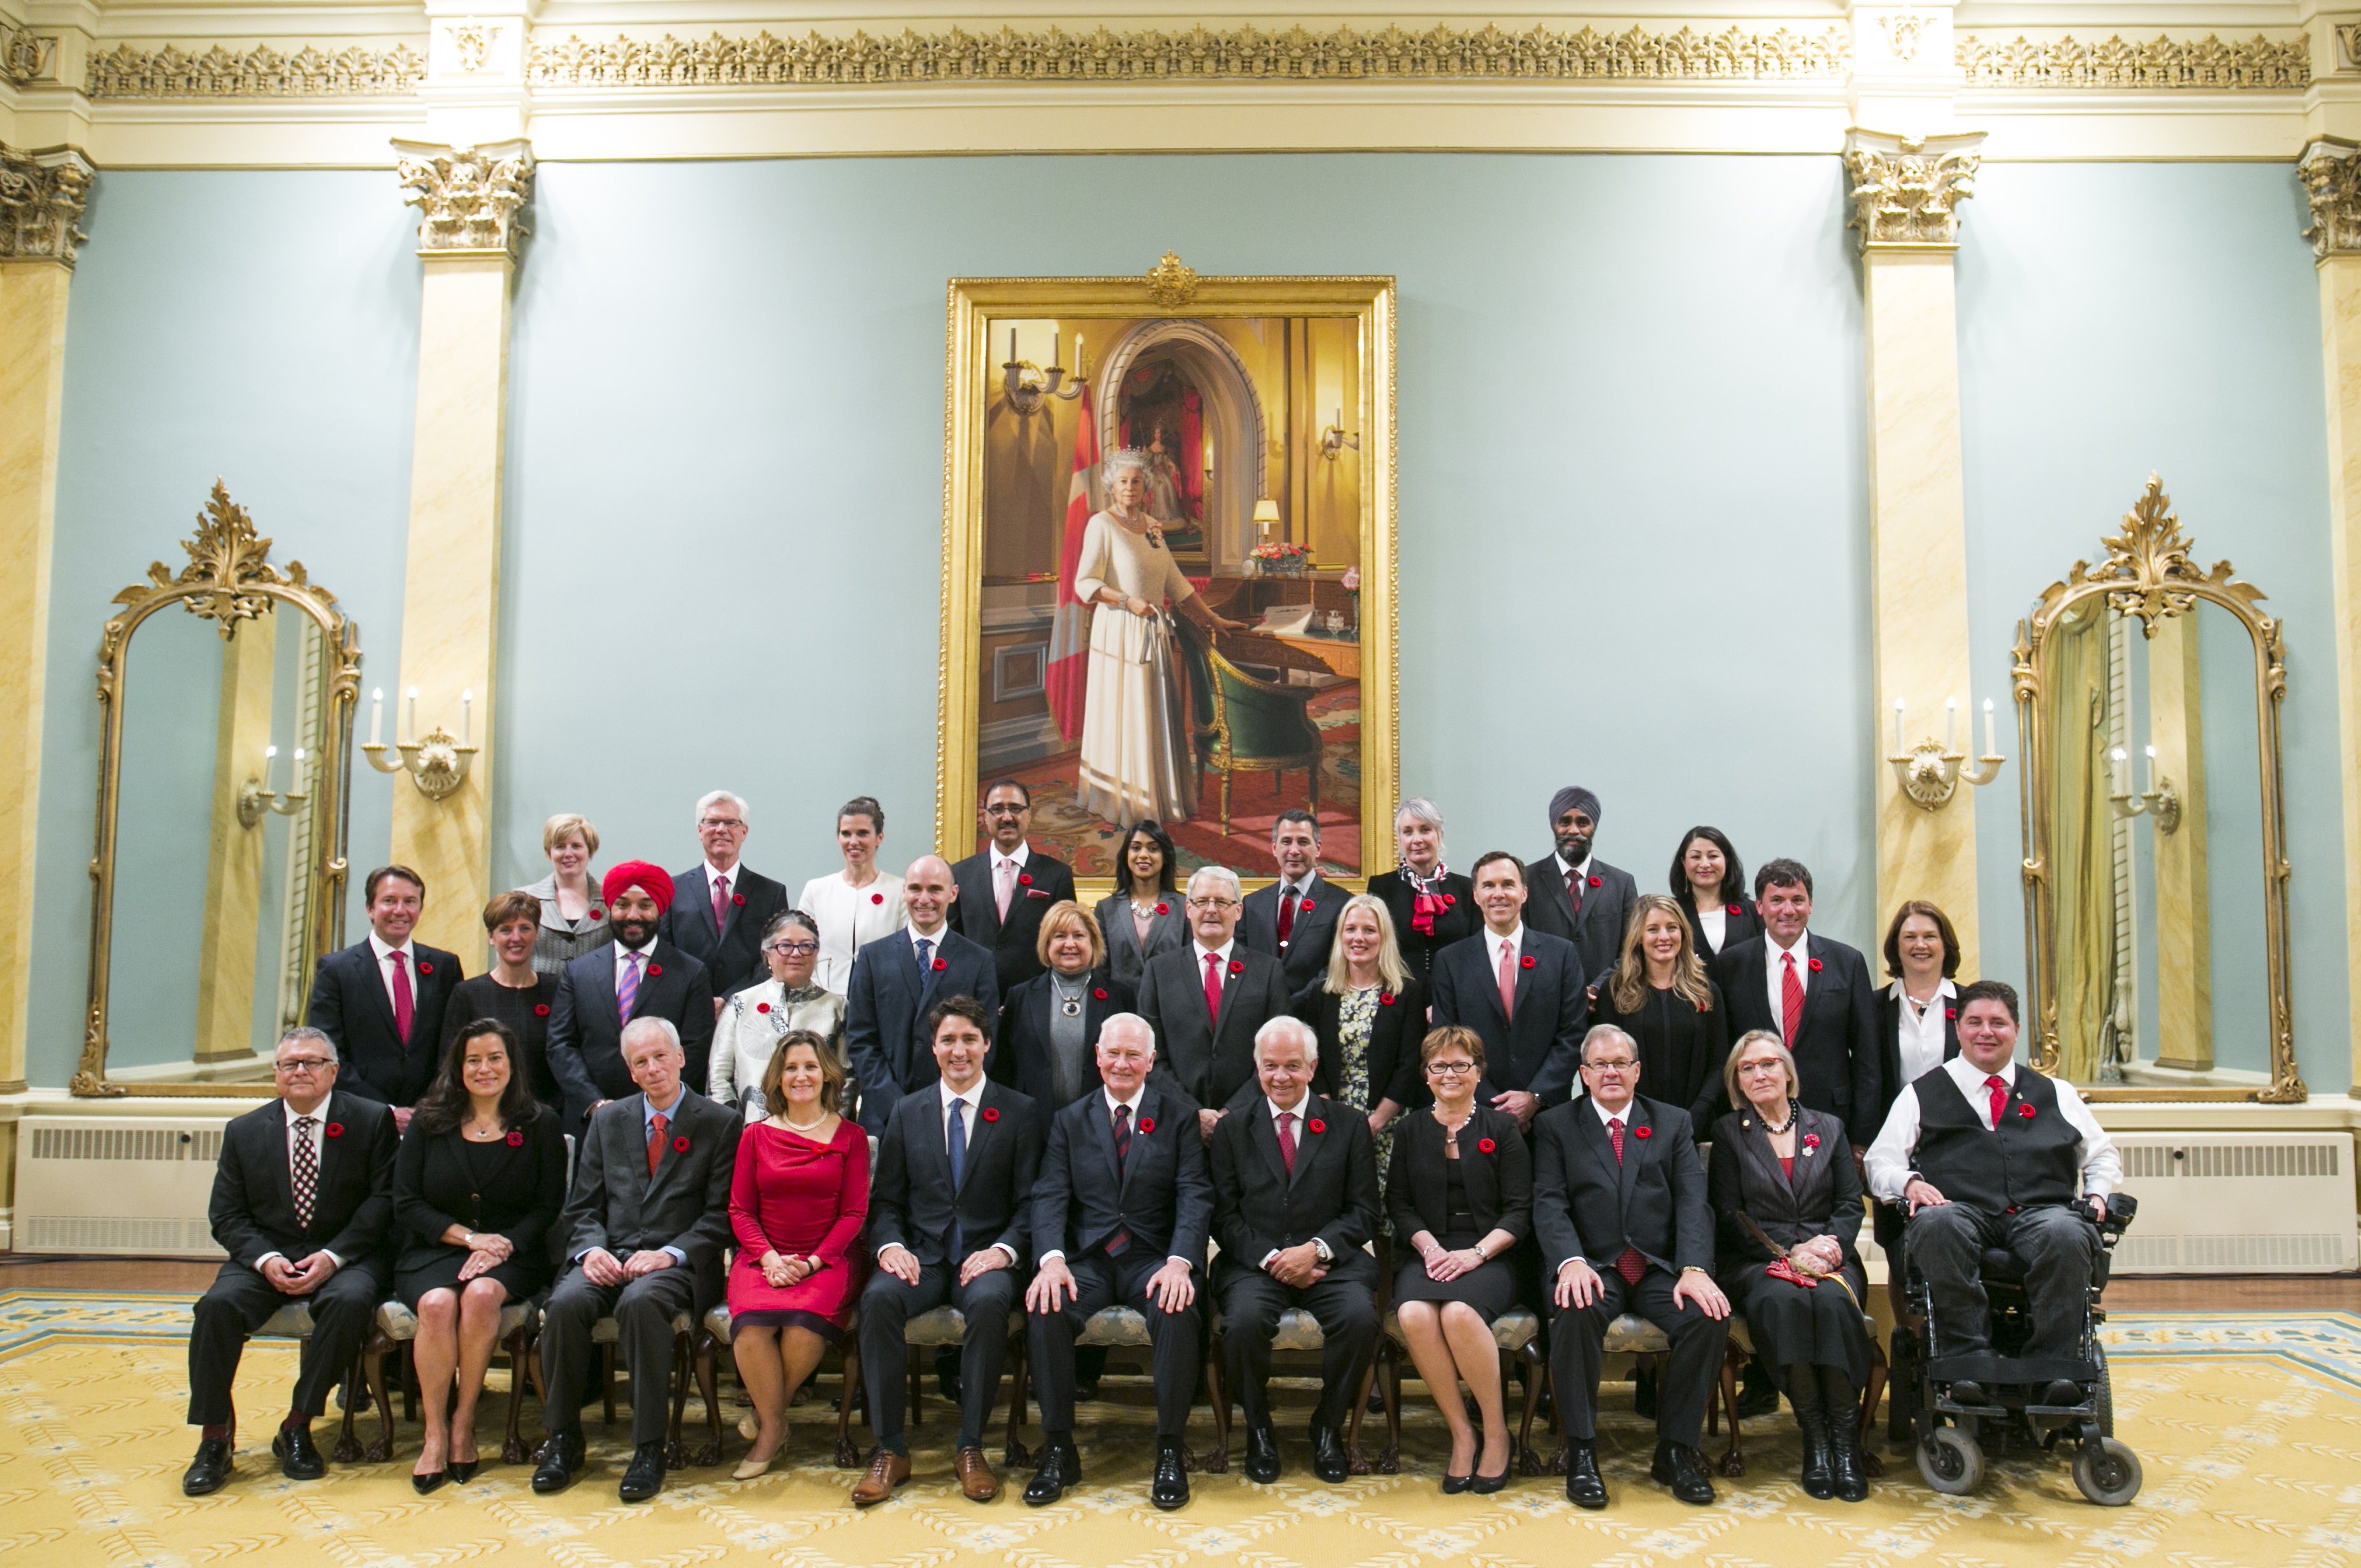 Newly elected Canadian Prime Minister Justin Trudeau takes a group photo with his Cabinet ministers at Rideau Hall in Ottawa on Nov. 4, 2015 (Chris Roussakis—Xinhua /Landov)